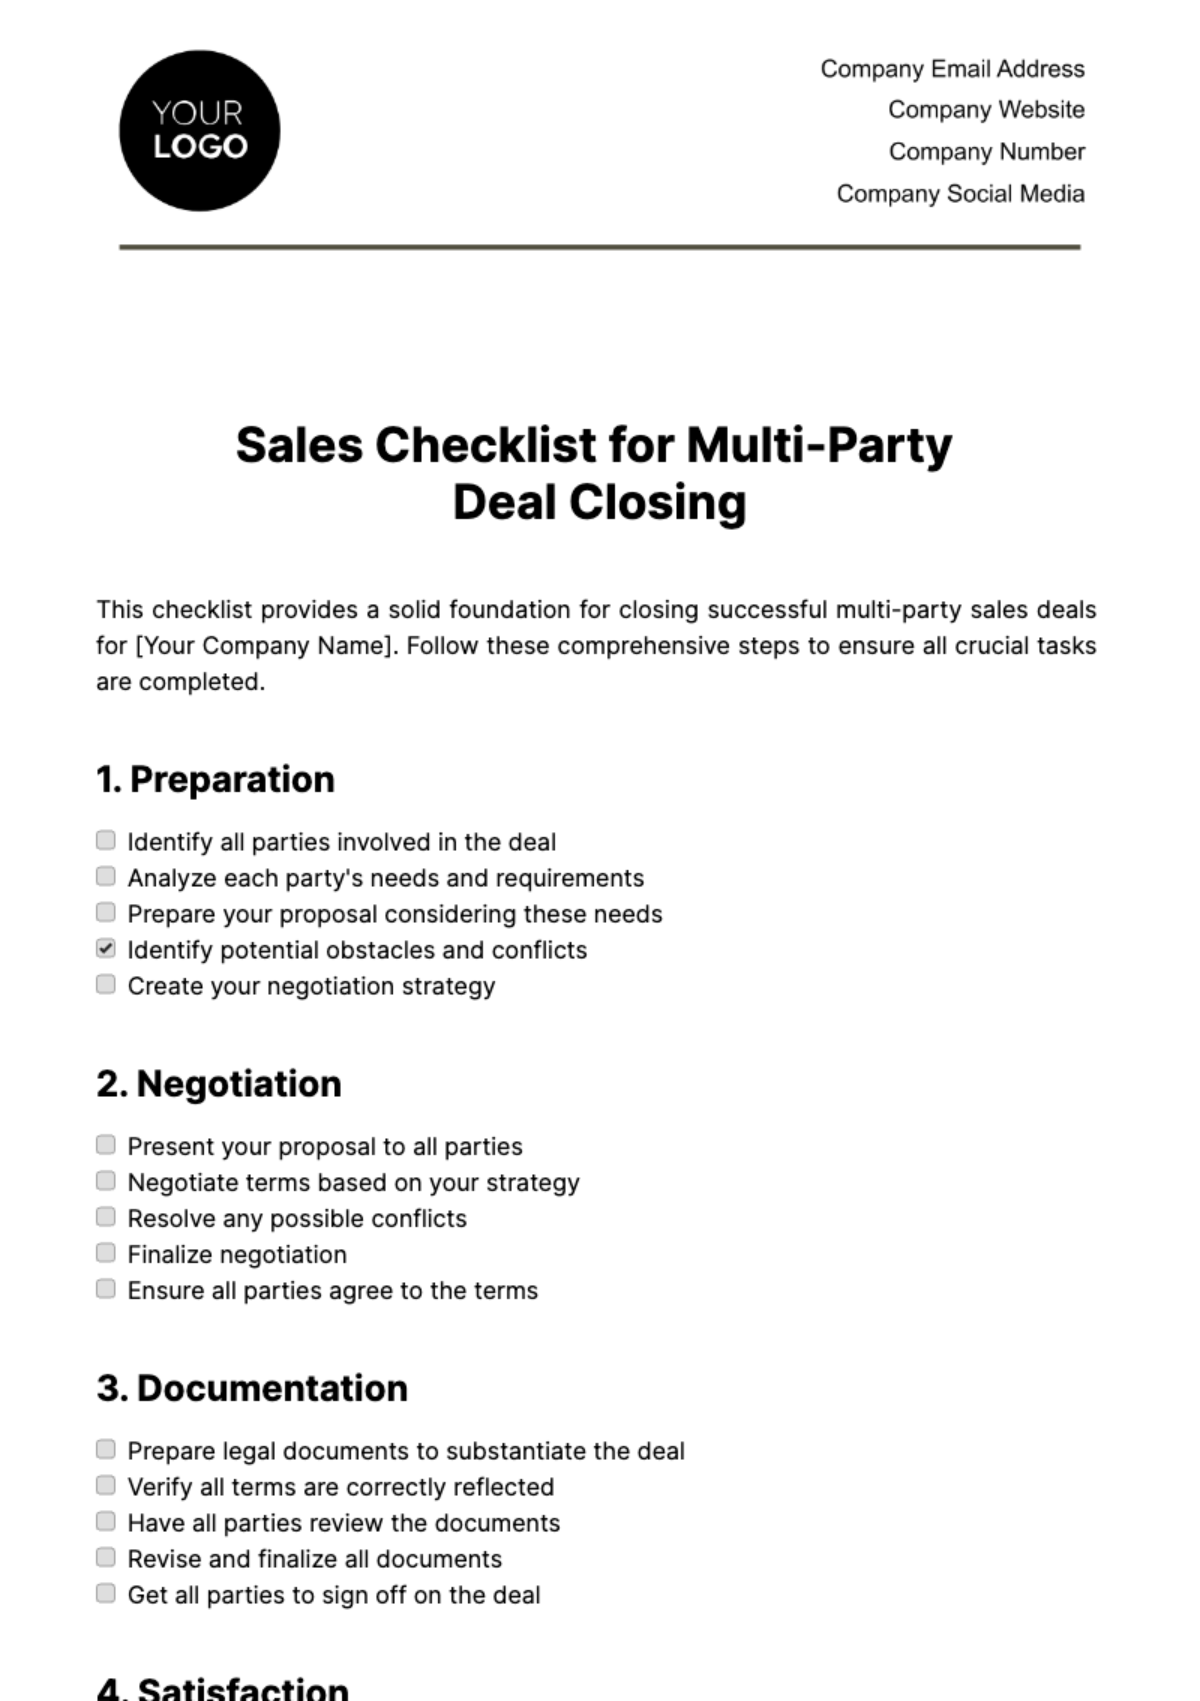 Sales Checklist for Multi-Party Deal Closing Template